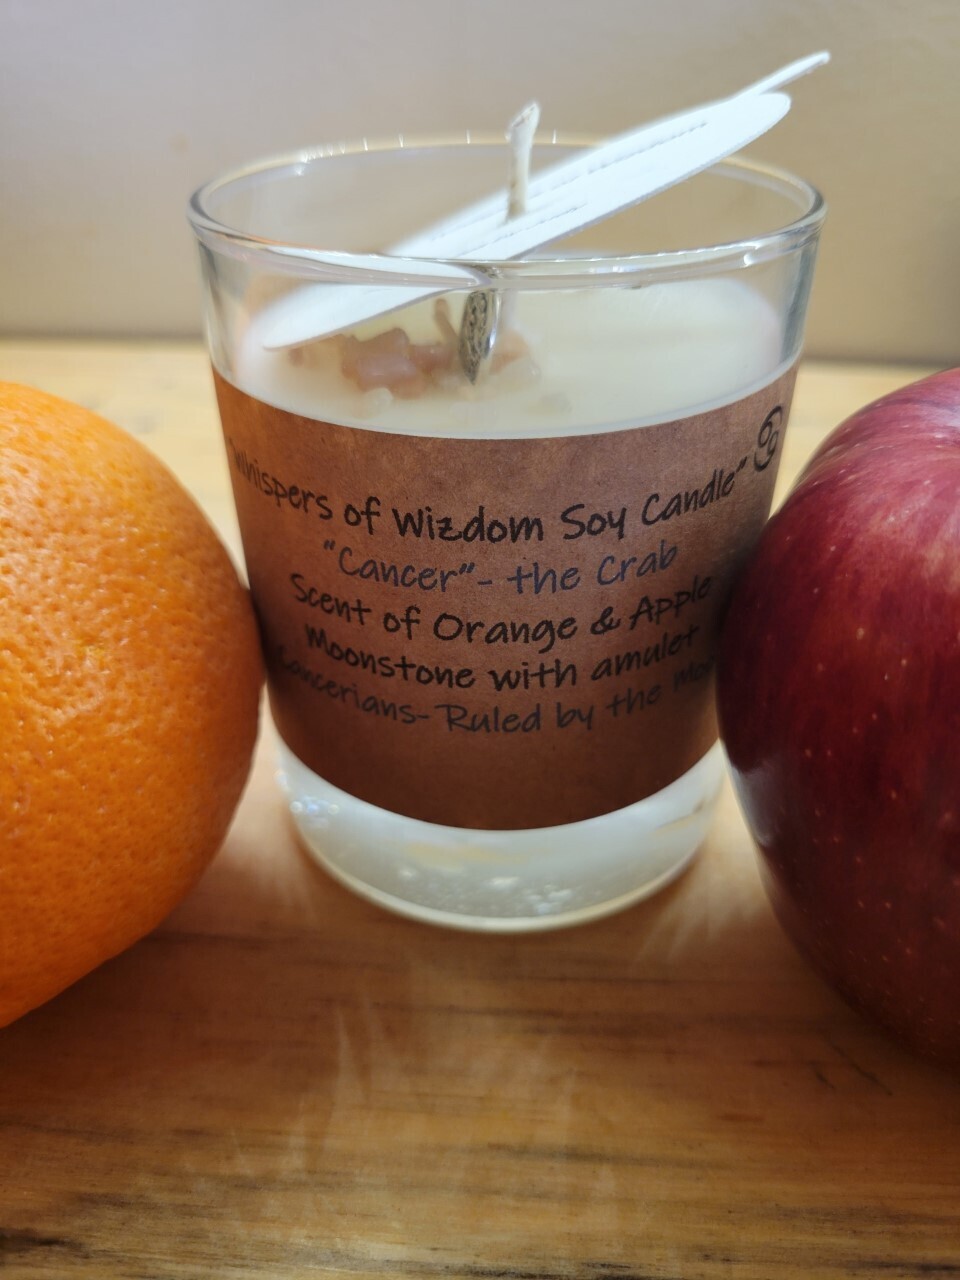 Judy's Soy Candle -Cancer - Apple & Orange Scented